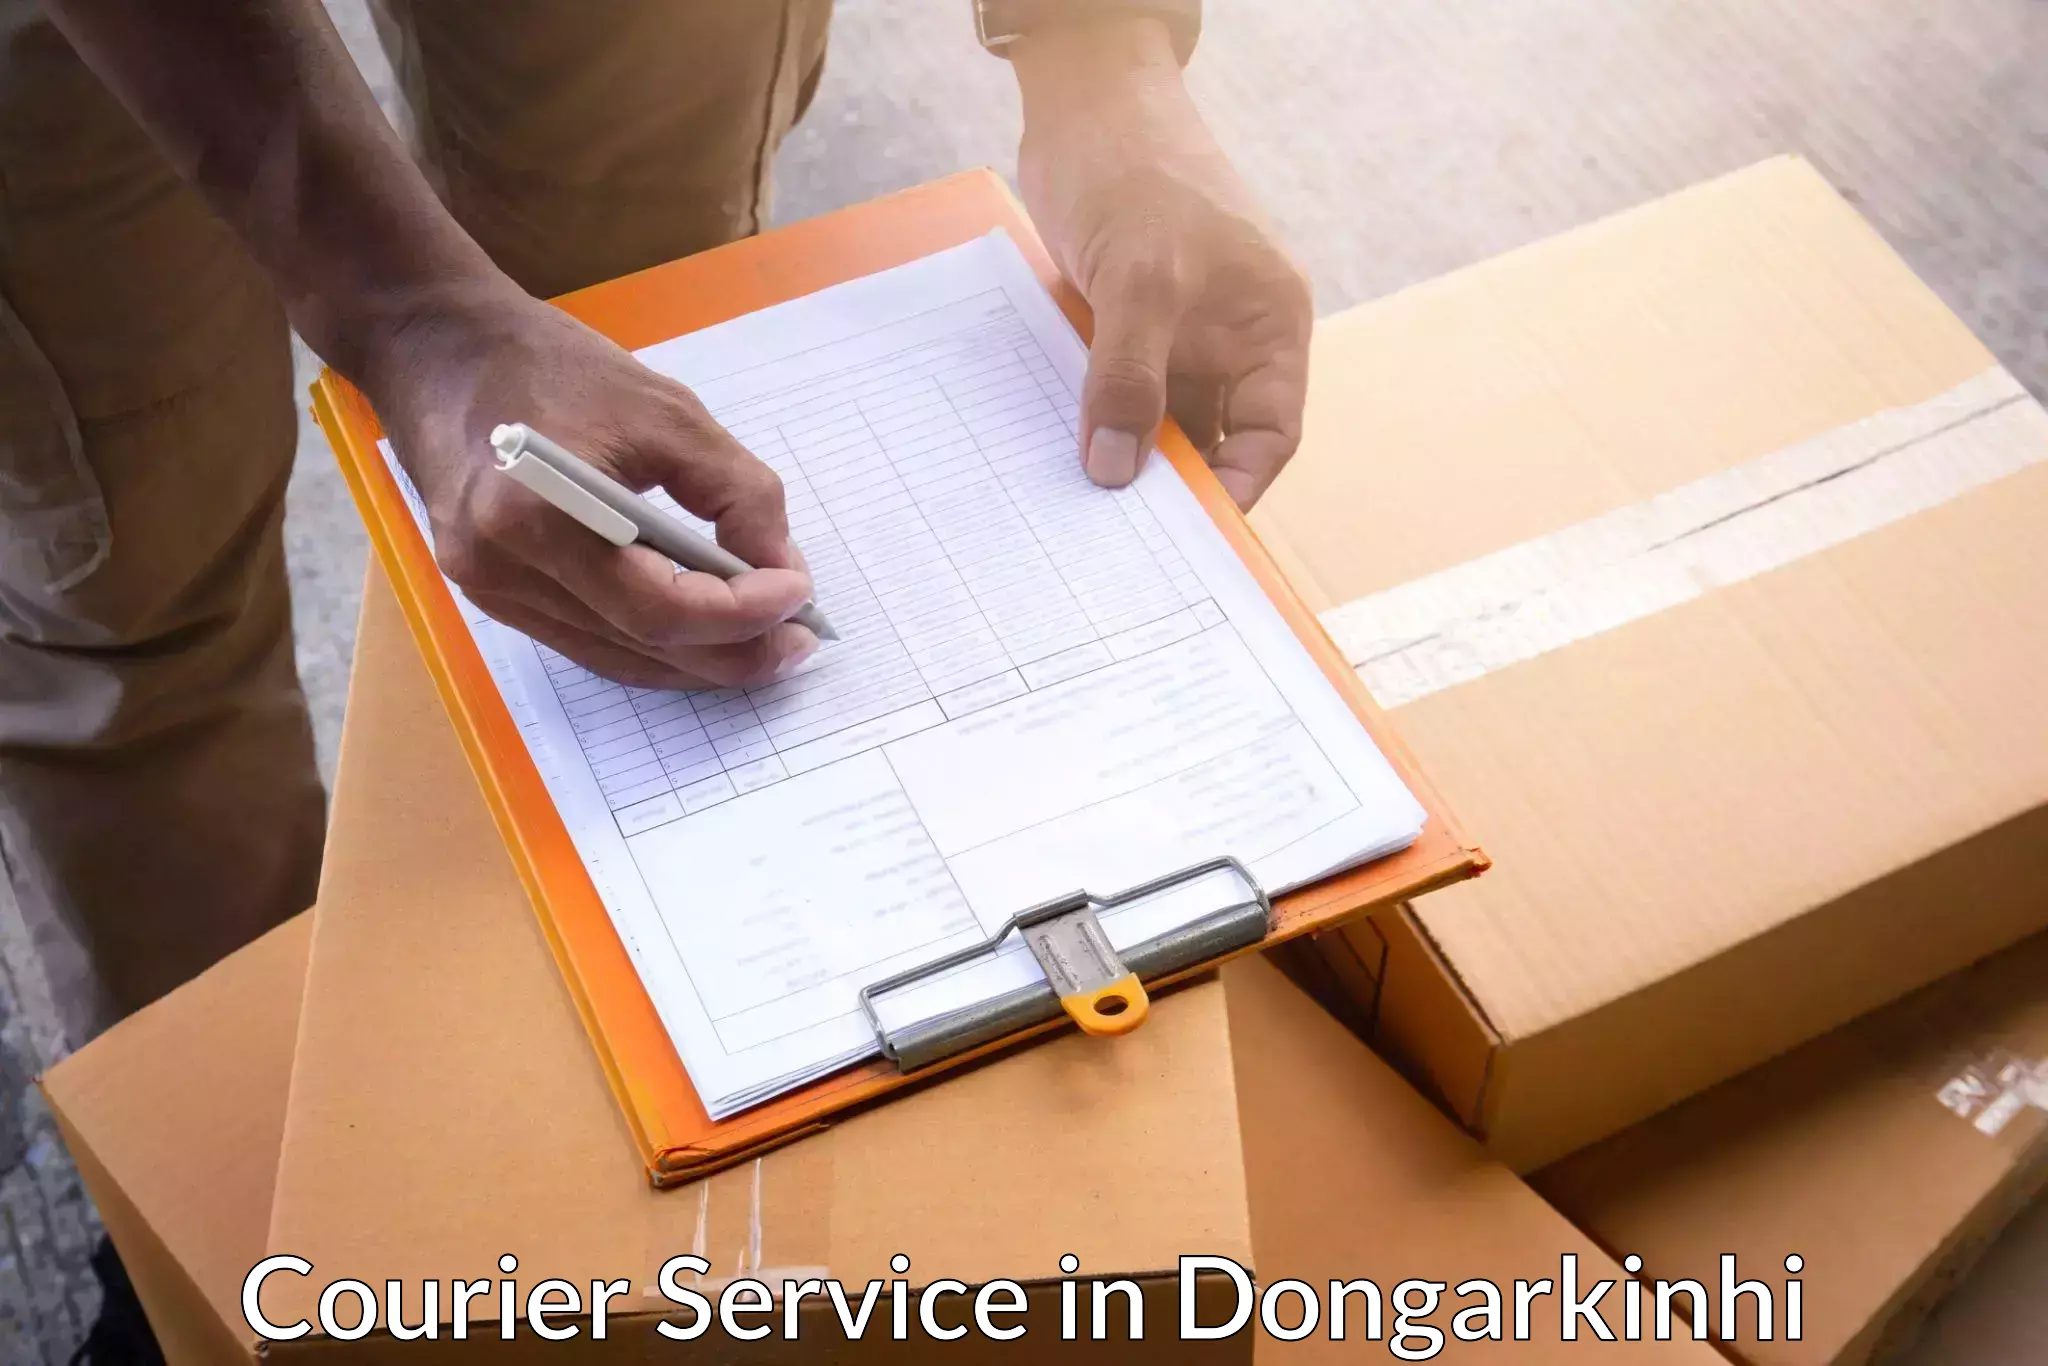 Reliable courier services in Dongarkinhi